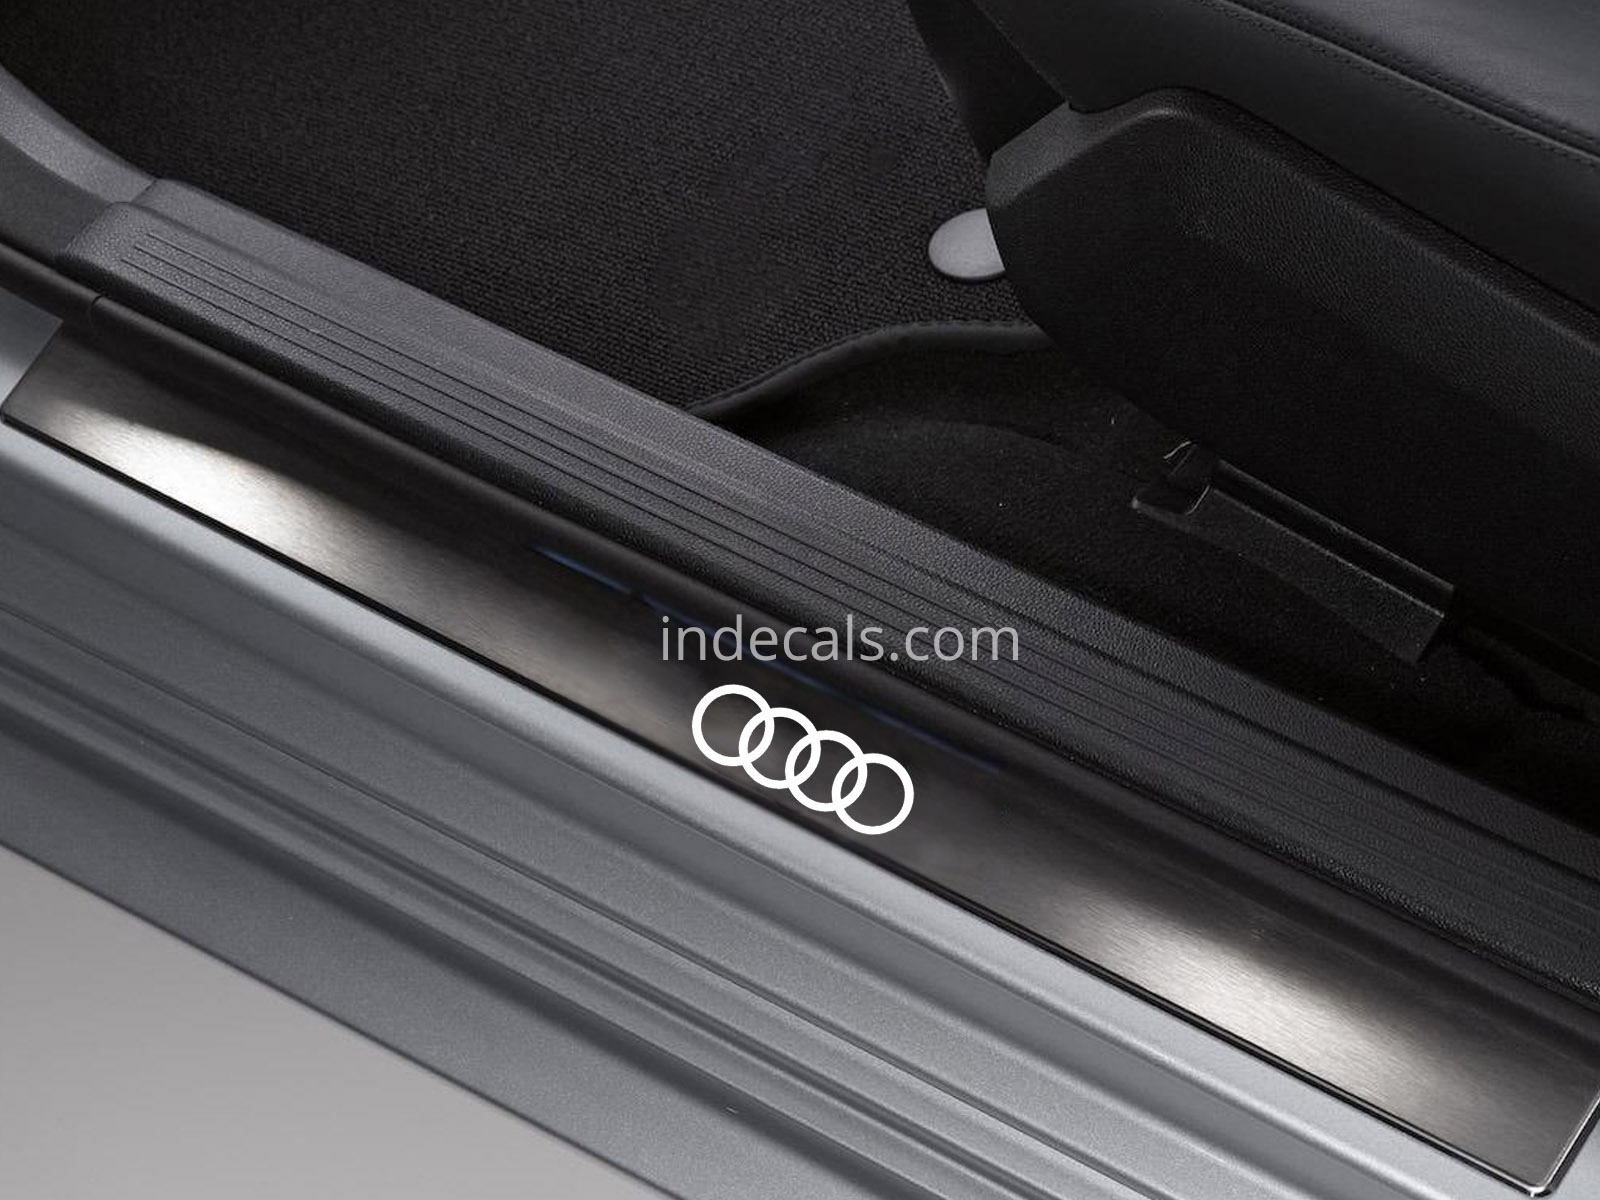 6 x Audi Rings Stickers for Door Sills - White